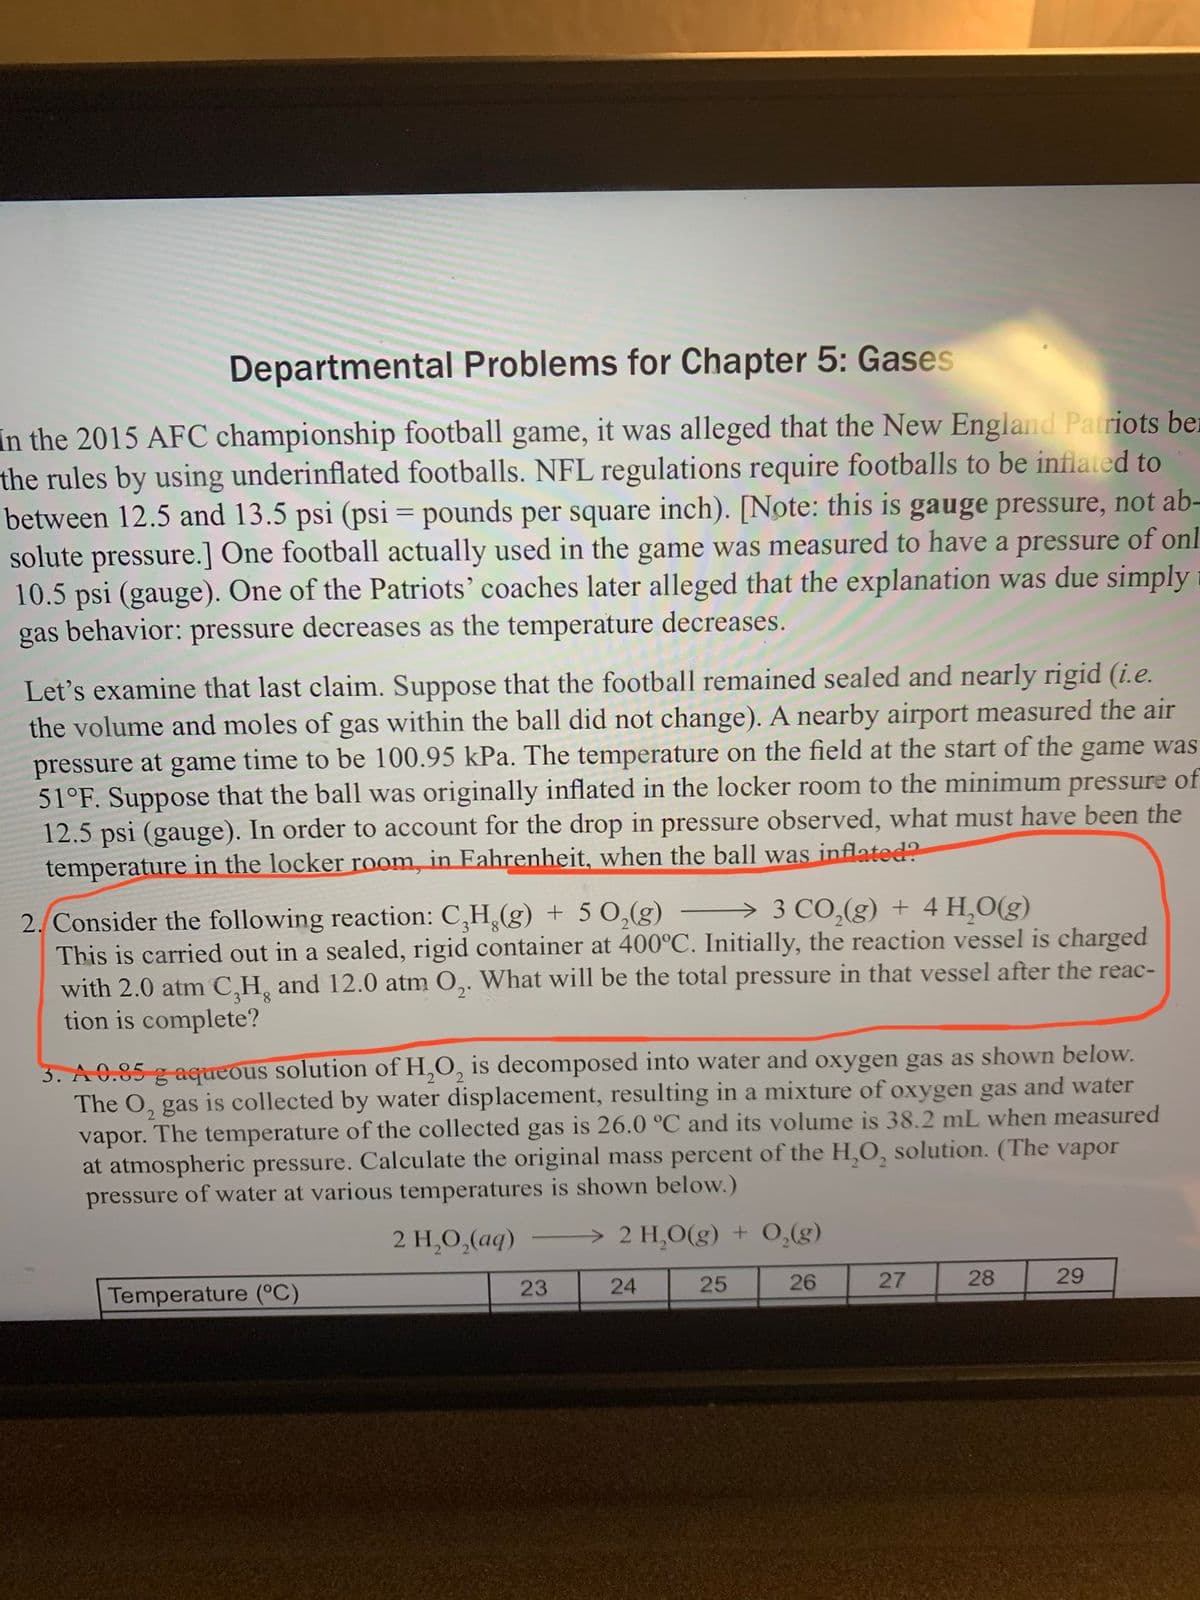 Departmental Problems for Chapter 5: Gases
In the 2015 AFC championship football game, it was alleged that the New England Patriots ber
the rules by using underinflated footballs. NFL regulations require footballs to be inflated to
between 12.5 and 13.5 psi (psi = pounds per square inch). [Note: this is gauge pressure, not ab-
solute pressure.] One football actually used in the game was measured to have a pressure of onl
10.5 psi (gauge). One of the Patriots' coaches later alleged that the explanation was due simply
gas behavior: pressure decreases as the temperature decreases.
Let's examine that last claim. Suppose that the football remained sealed and nearly rigid (i.e.
the volume and moles of gas within the ball did not change). A nearby airport measured the air
pressure at game time to be 100.95 kPa. The temperature on the field at the start of the game was
51°F. Suppose that the ball was originally inflated in the locker room to the minimum pressure of
12.5 psi (gauge). In order to account for the drop in pressure observed, what must have been the
temperature in the locker room, in Fahrenheit, when the ball was inflated?
→ 3 CO,(g) + 4 H,O(g)
2. Consider the following reaction: C,H,(g) + 5 0,(g)
This is carried out in a sealed, rigid container at 400°C. Initially, the reaction vessel is charged
with 2.0 atm C,H, and 12.0 atm O,. What will be the total pressure in that vessel after the reac-
tion is complete?
8.
2'
3. A 0.85 g aqueous solution of H,O, is decomposed into water and oxygen gas as shown below.
The O, gas is collected by water displacement, resulting in a mixture of oxygen gas and water
vapor. The temperature of the collected gas is 26.0 °C and its volume is 38.2 mL when measured
at atmospheric pressure. Calculate the original mass percent of the H,O, solution. (The vapor
pressure of water at various temperatures is shown below.)
2 H,O,(aq)
> 2 H,O(g) + 0,(g)
23
24
25
26
27
28
29
Temperature (°C
